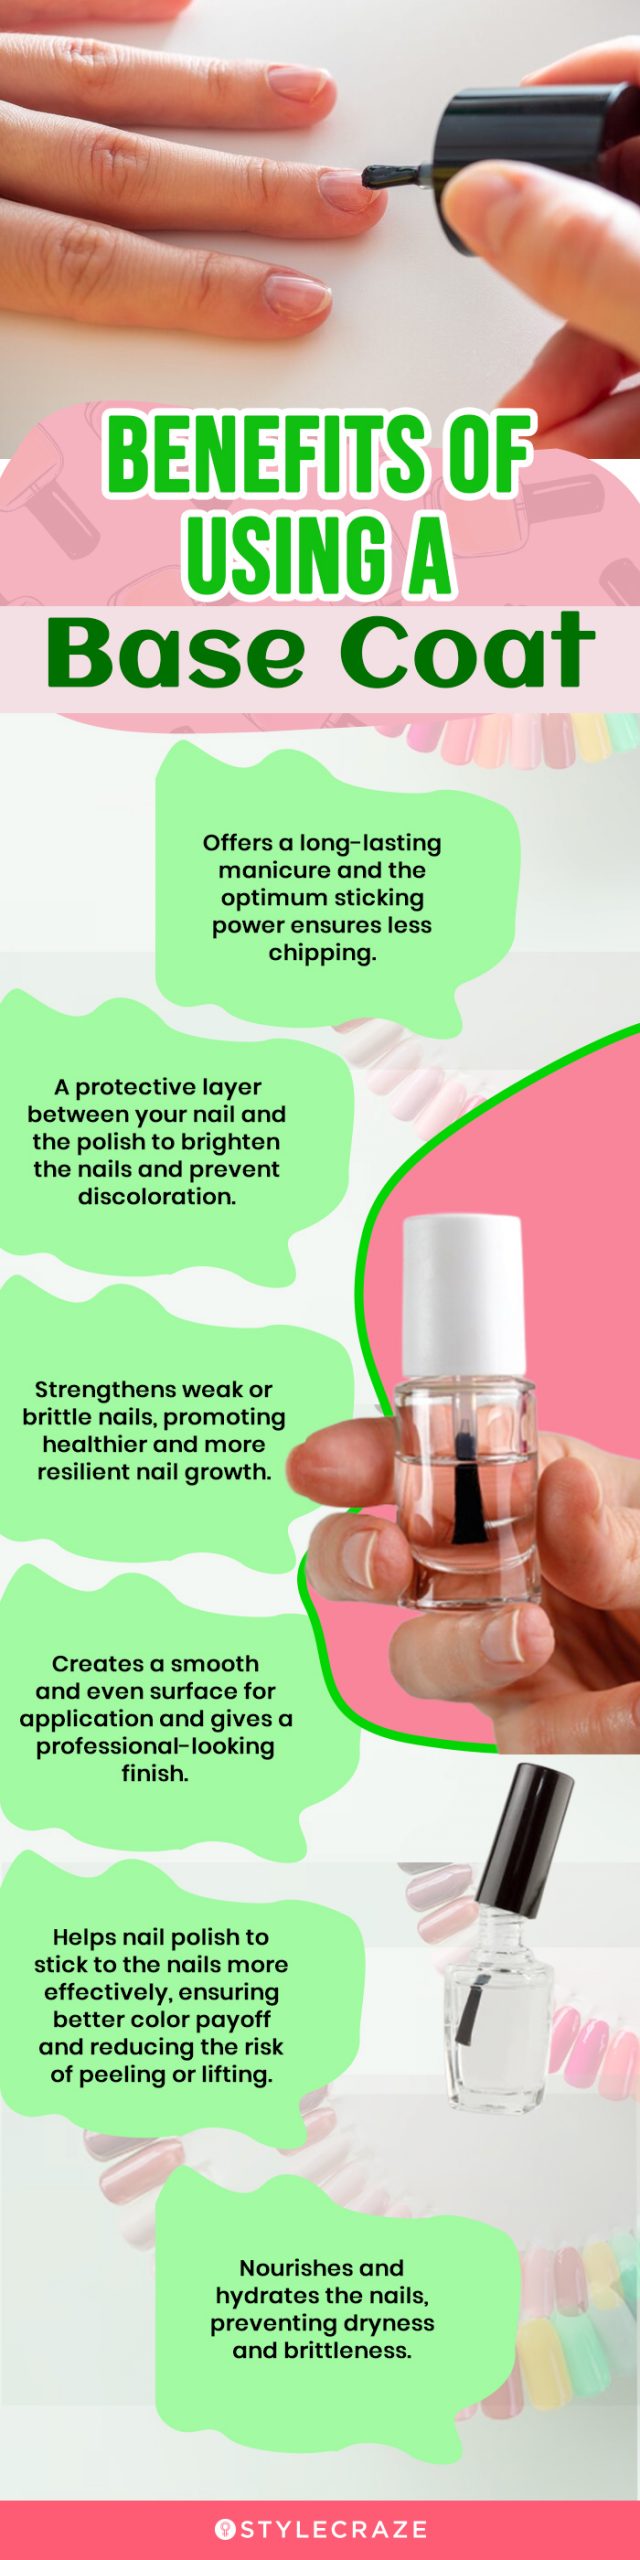 Benefits Of Using A Base Coat(infographic)